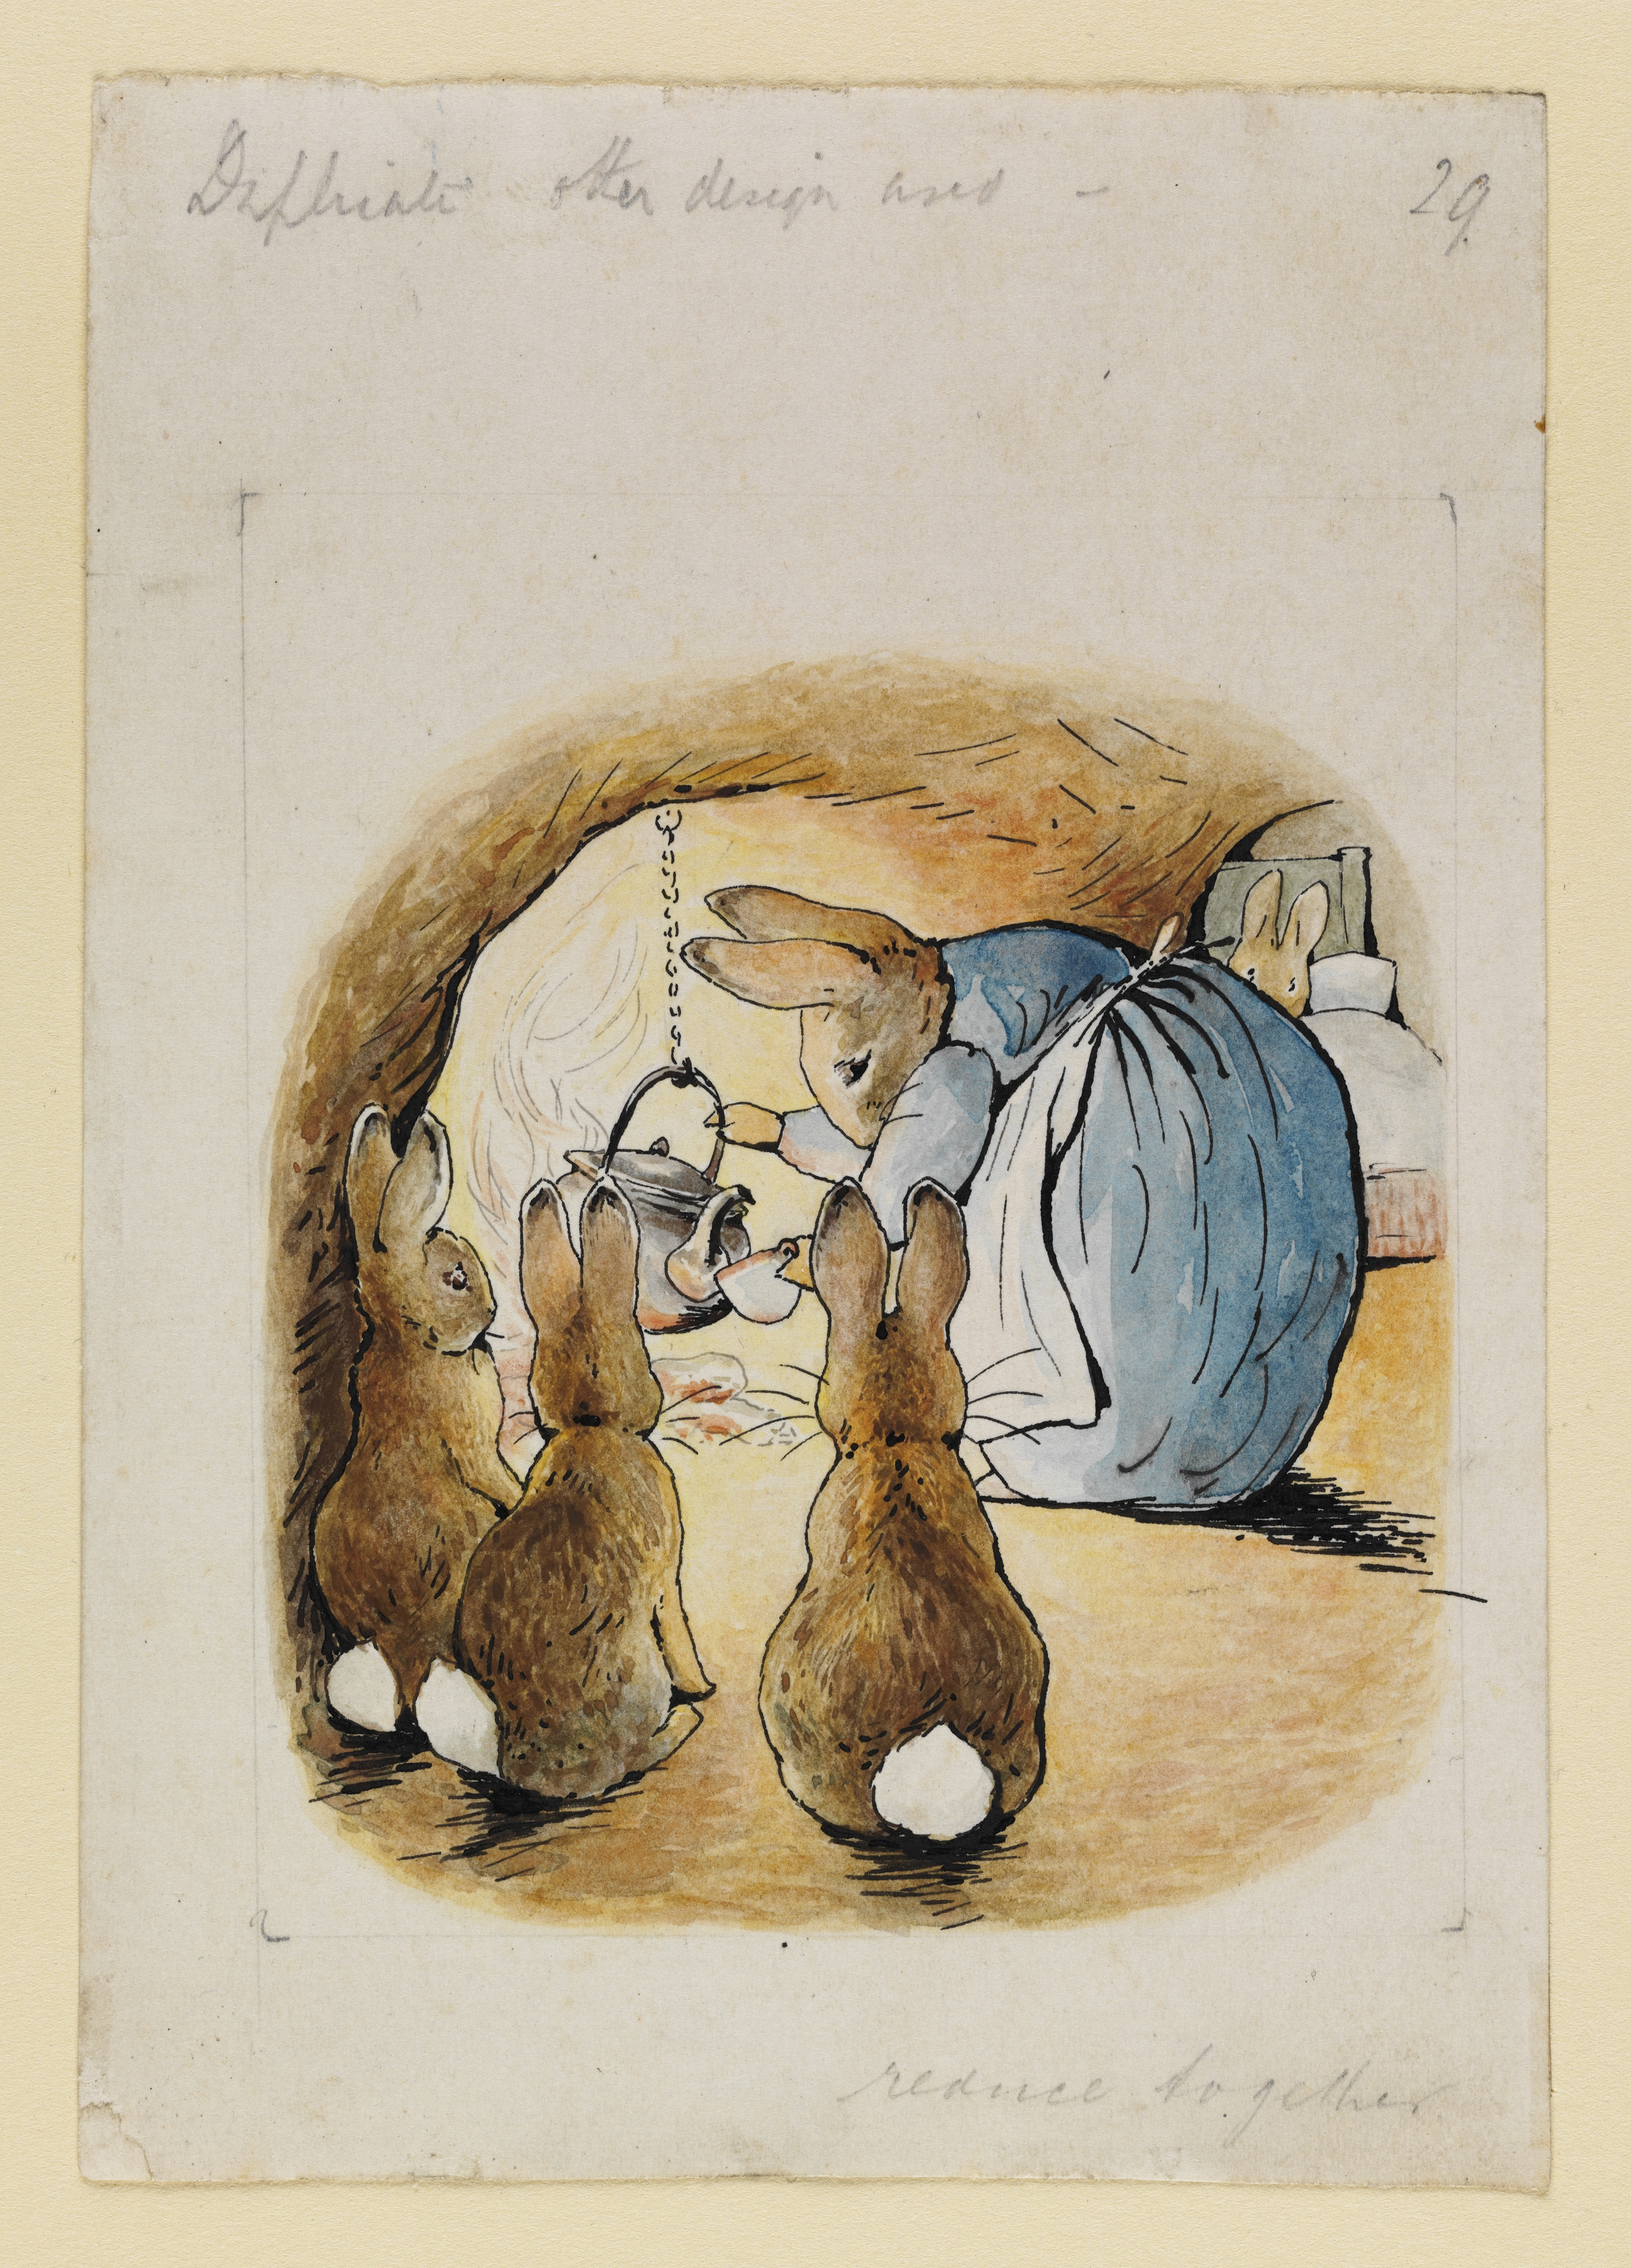 Mrs Rabbit pouring tea for Peter for The tale of Peter Rabbit by Beatrix Potter, 1902. © Victoria and Albert Museum, London, courtesy Frederick Warne & Co Ltd